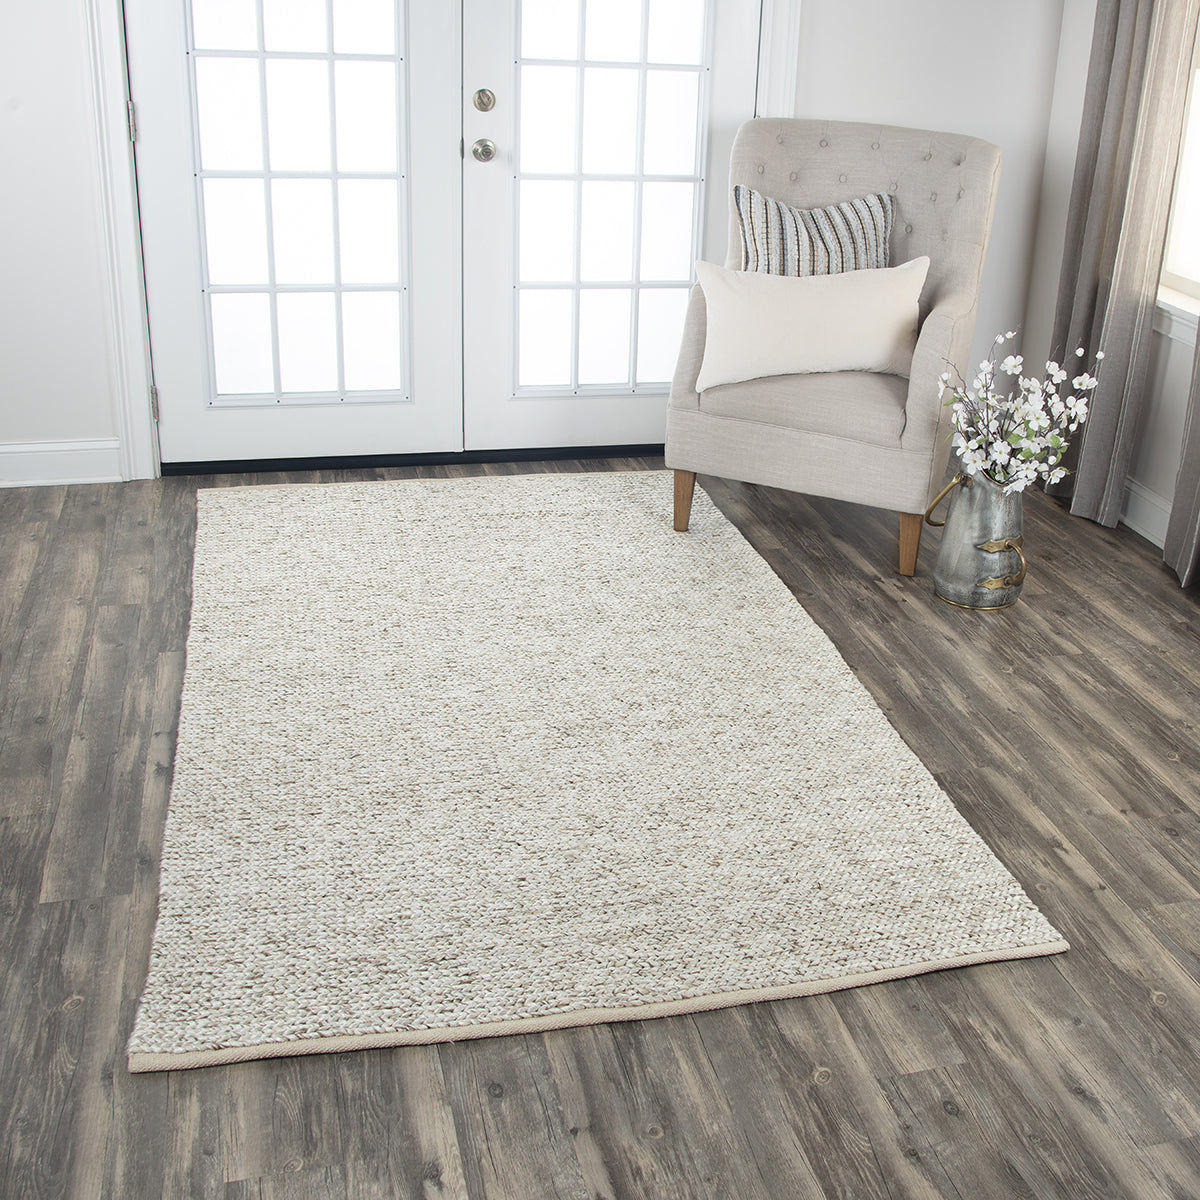 Rizzy Ewe Complete me EWE102 Neutral Area Rug by Donny Osmond Home main image